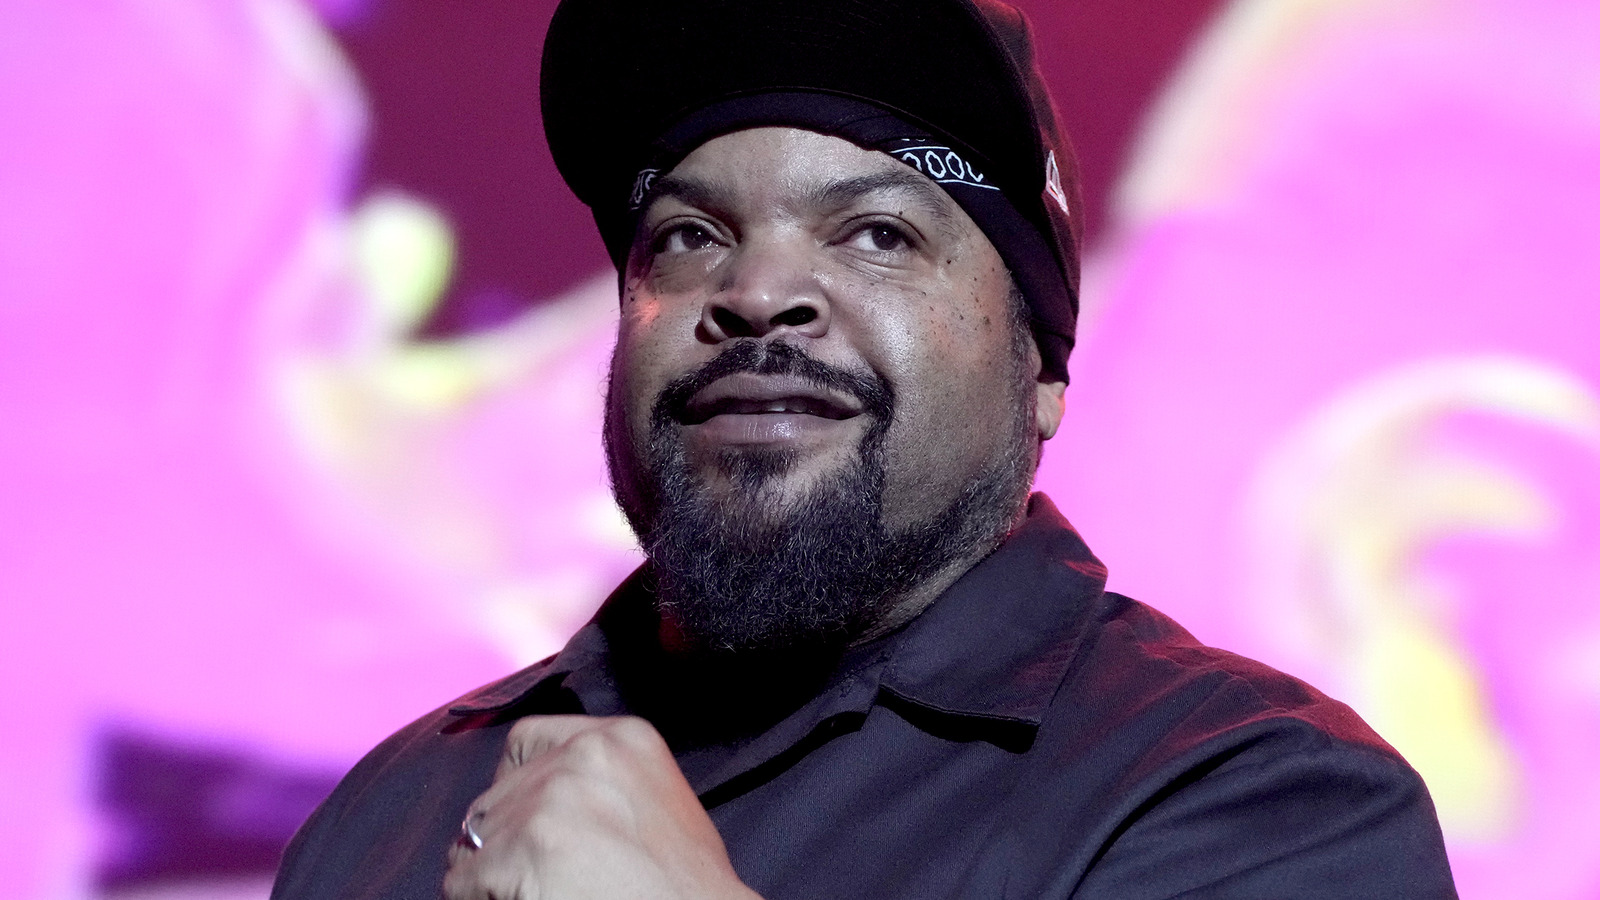 https://www.looper.com/img/gallery/ice-cube-pays-homage-to-ice-t-in-new-tmnt-mutant-mayhem-trailer/l-intro-1685570355.jpg